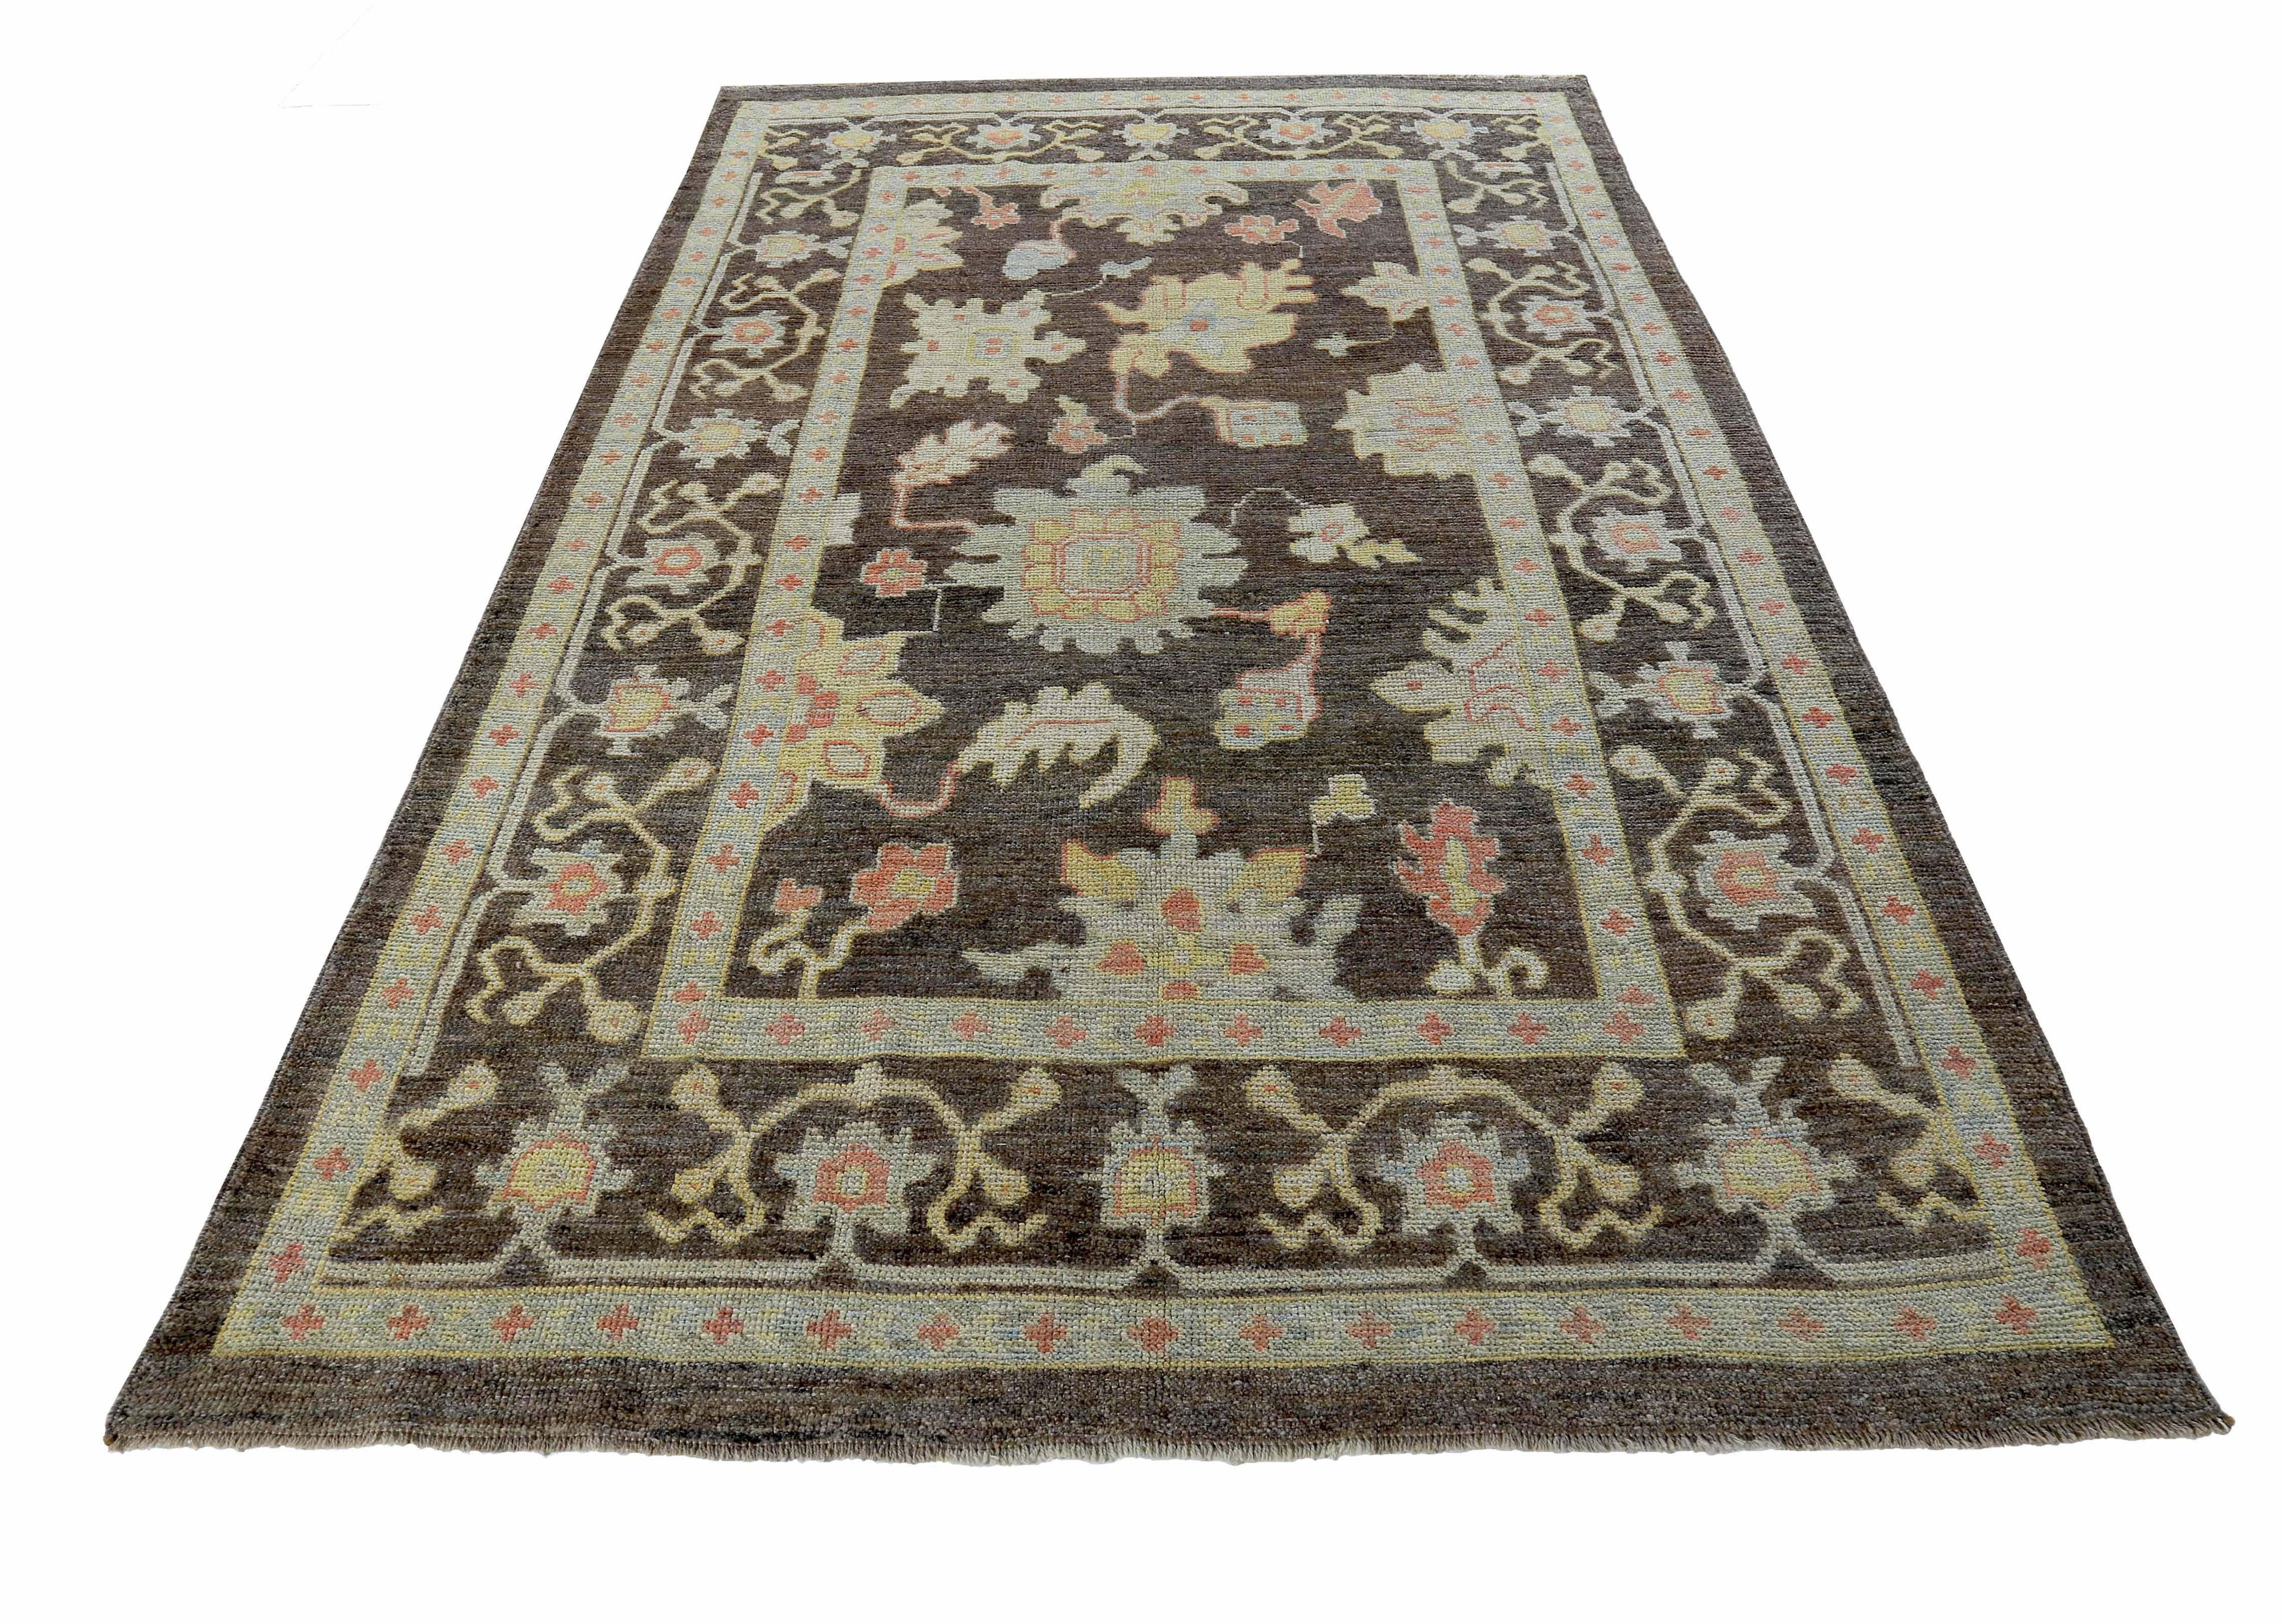 New Turkish rug made of handwoven sheep’s wool of the finest quality. It’s colored with organic vegetable dyes that are certified safe for humans and pets alike. It features pink and blue floral details on an elegant brown field. Flower patterns are